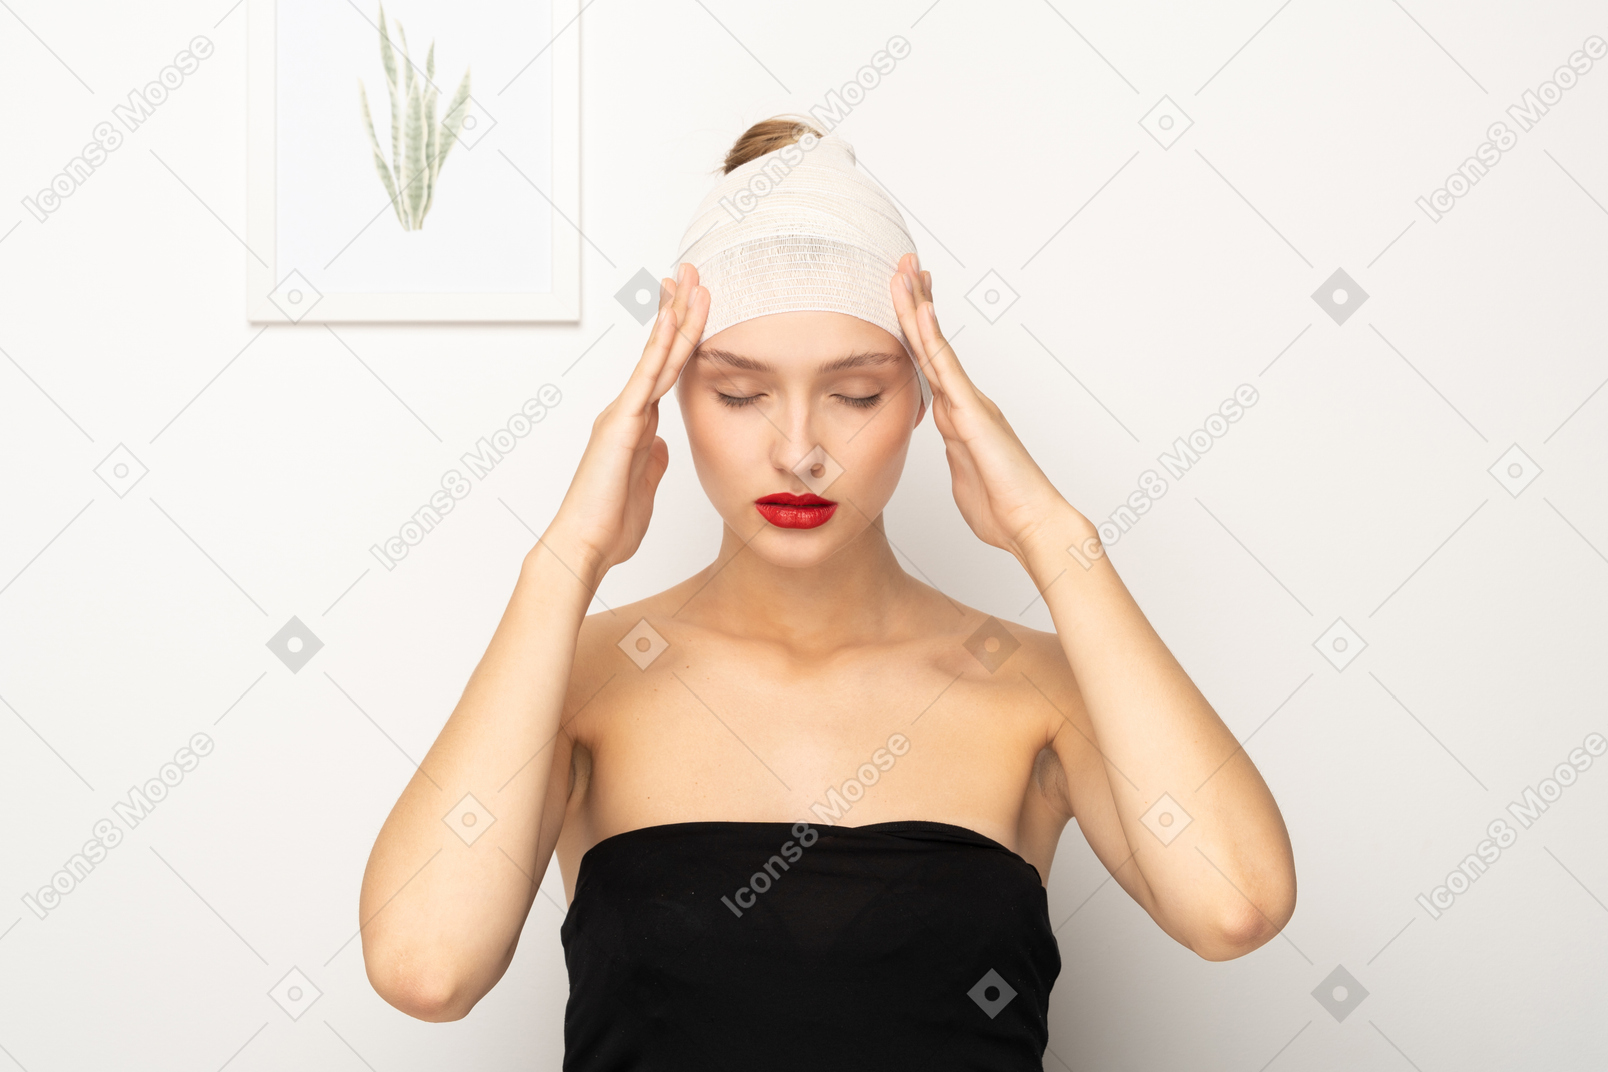 Young woman holding her head with both hands